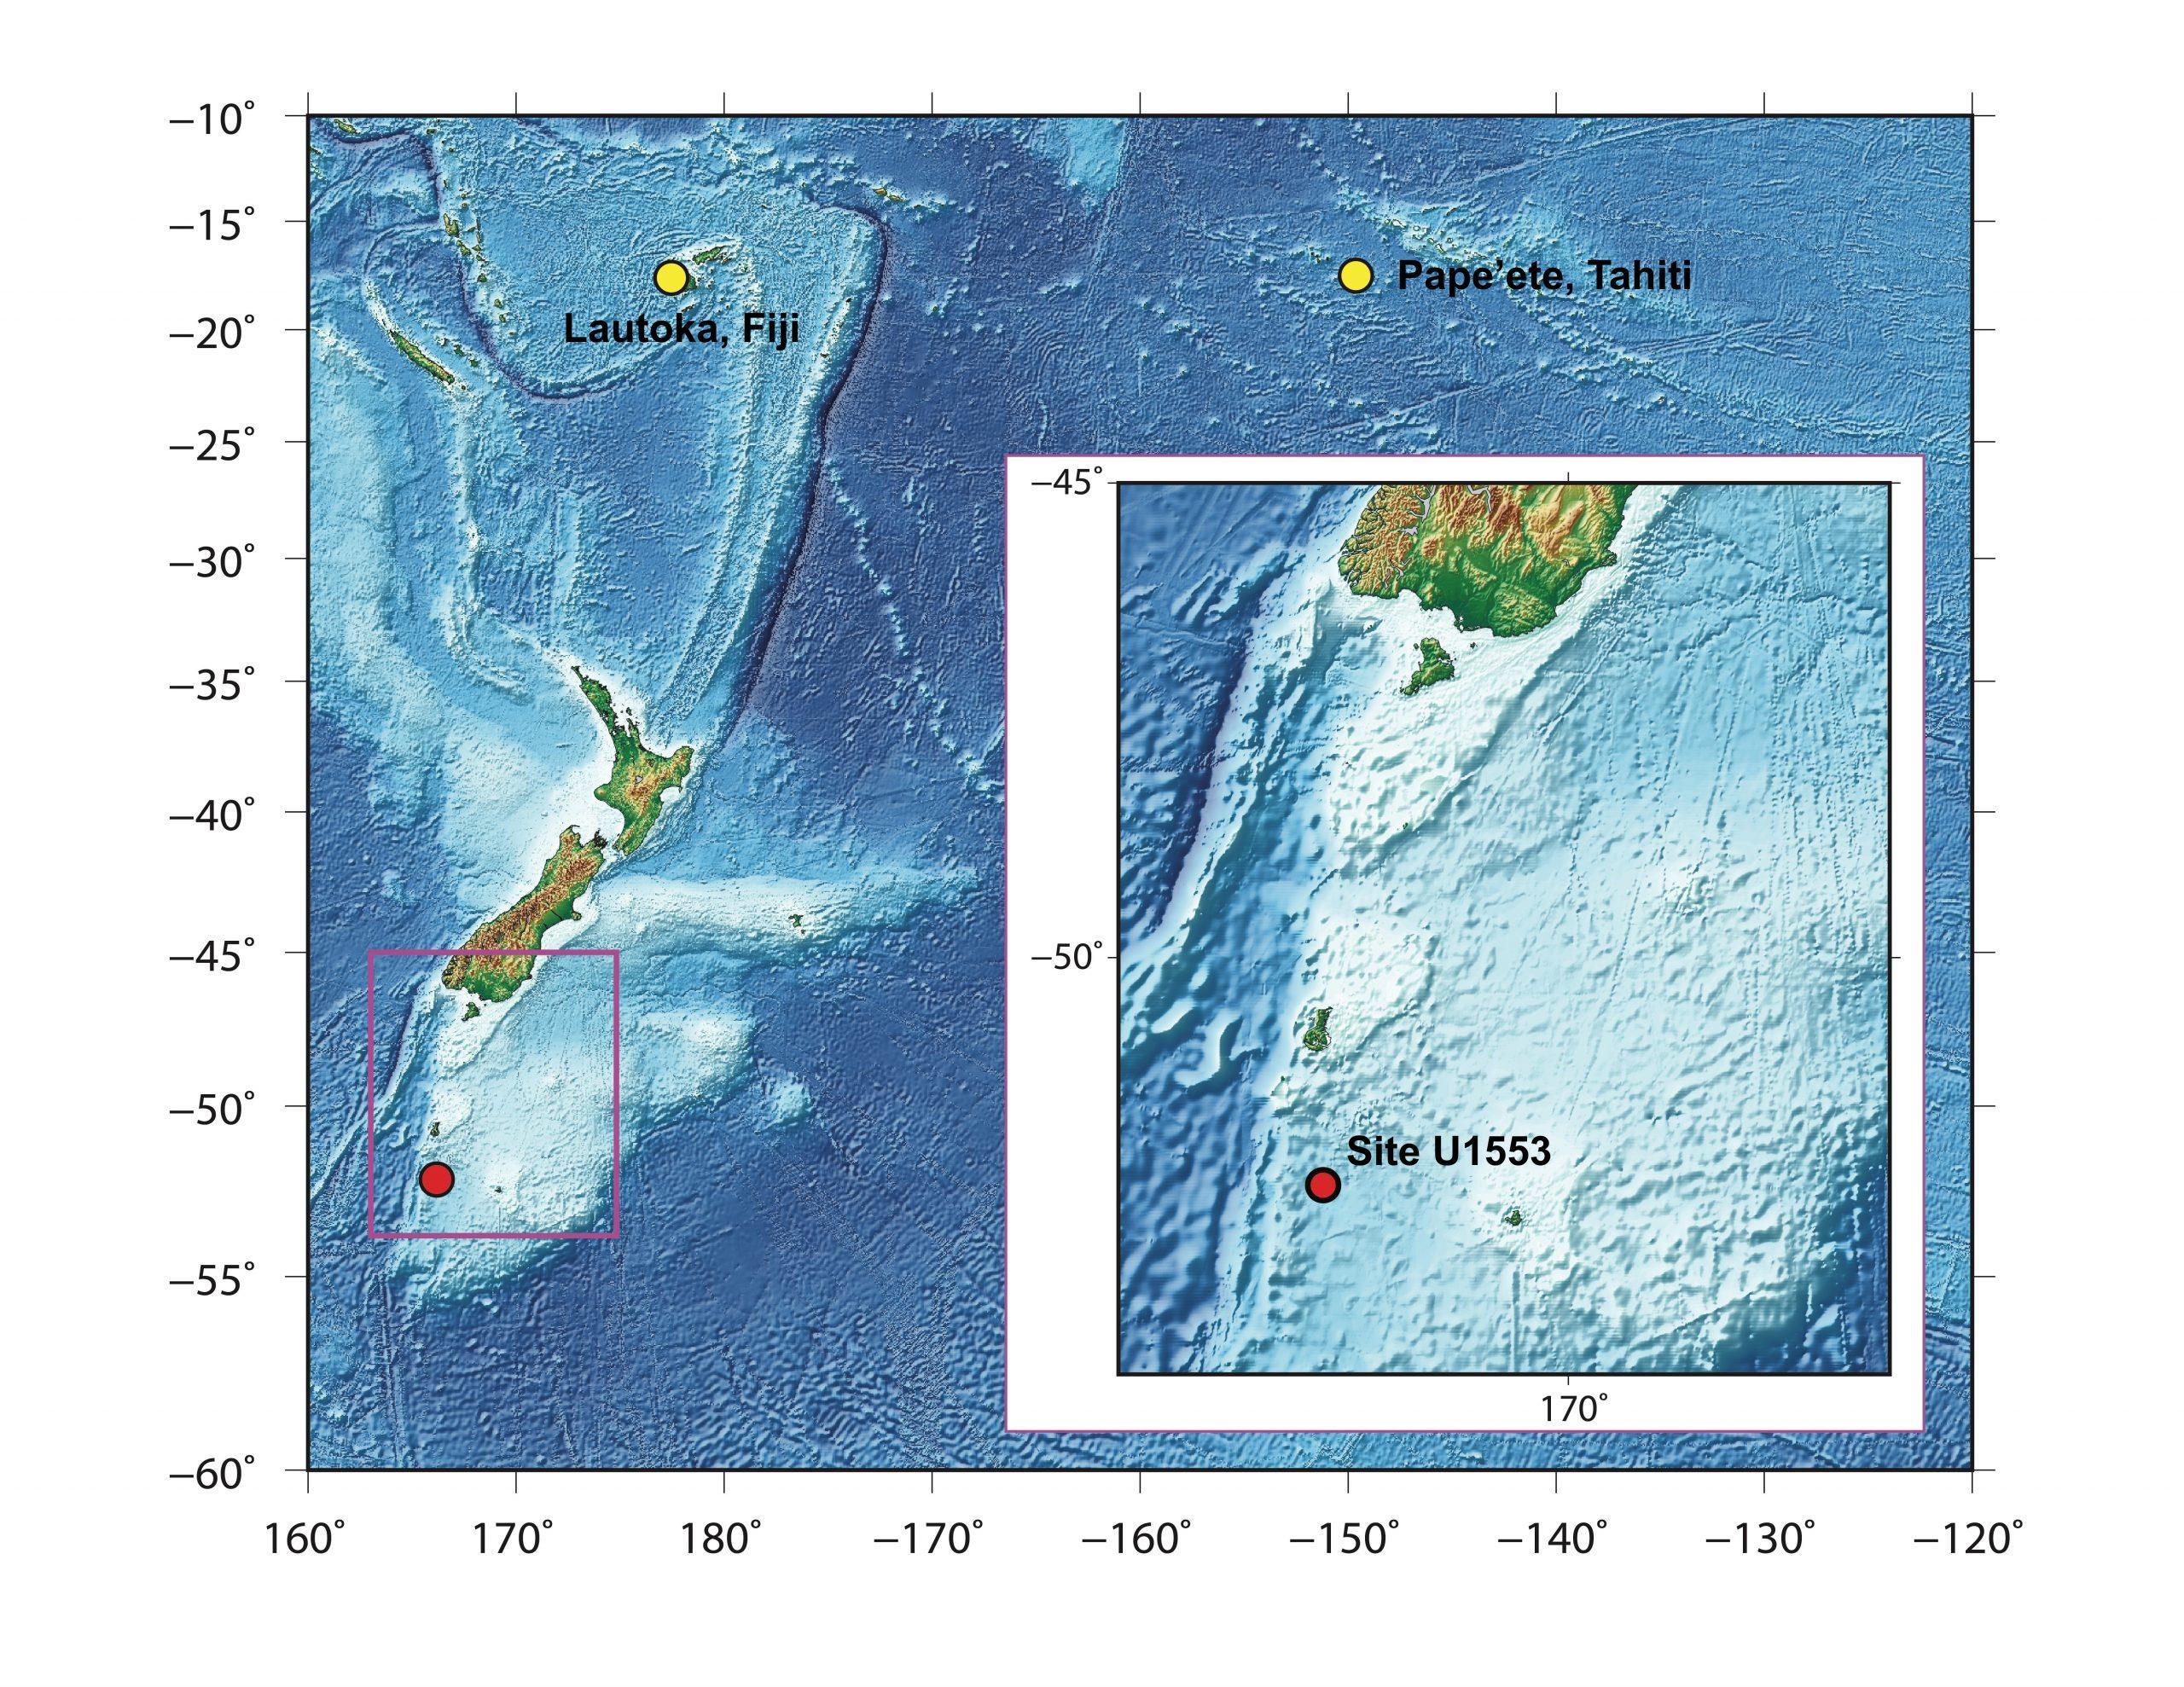 A map showing the planned drill site for Expedition 378. The drill site is slightly to the South of New Zealand. The map also highlights the beginning port of Lautoka, Fiji, and the ending port of Pape'ete, Tahiti